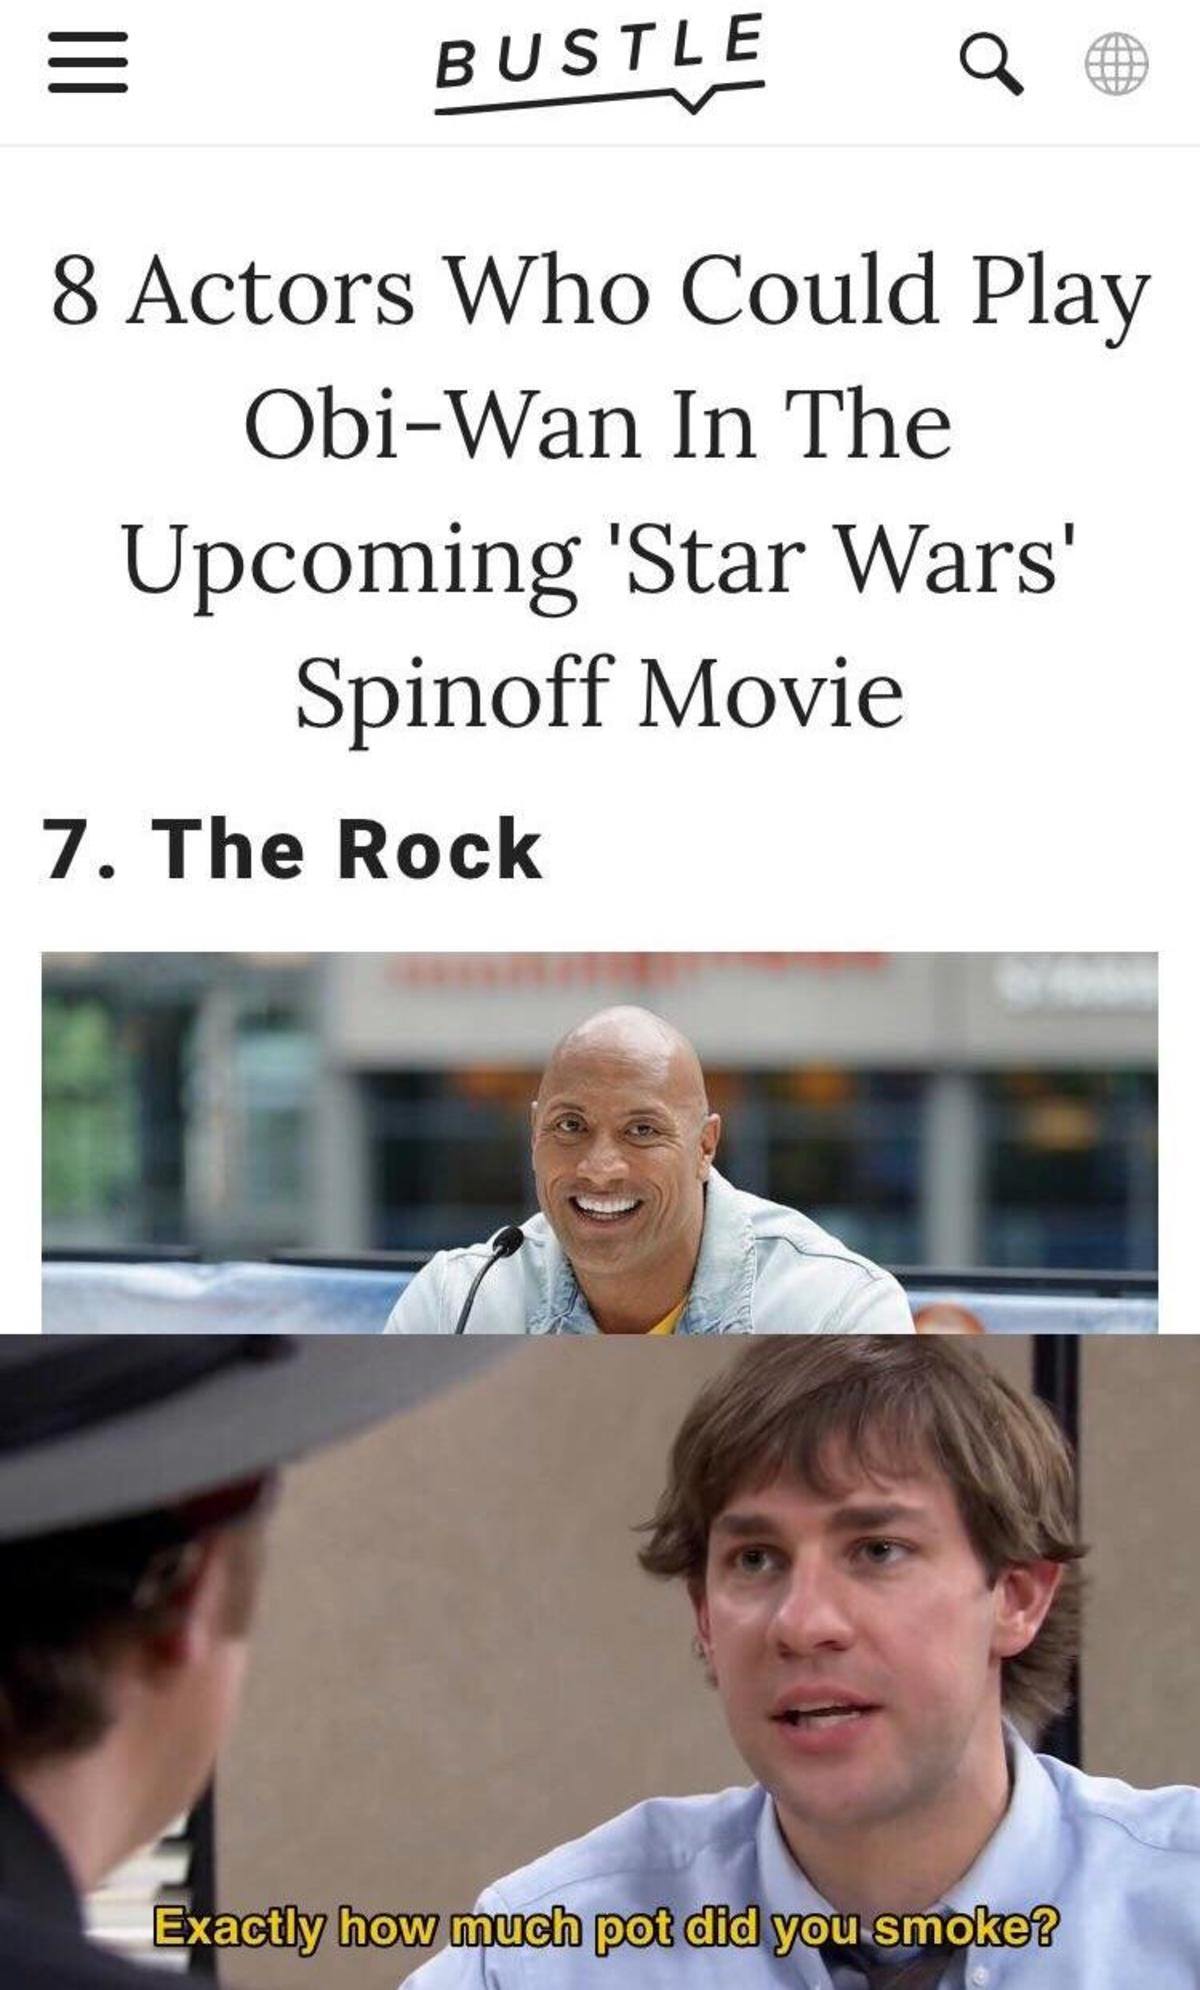 obi wan memes - Bustle Q @ 8 Actors Who Could Play ObiWan In The Upcoming 'Star Wars' Spinoff Movie 7. The Rock Exactly how much pot did you smoke?